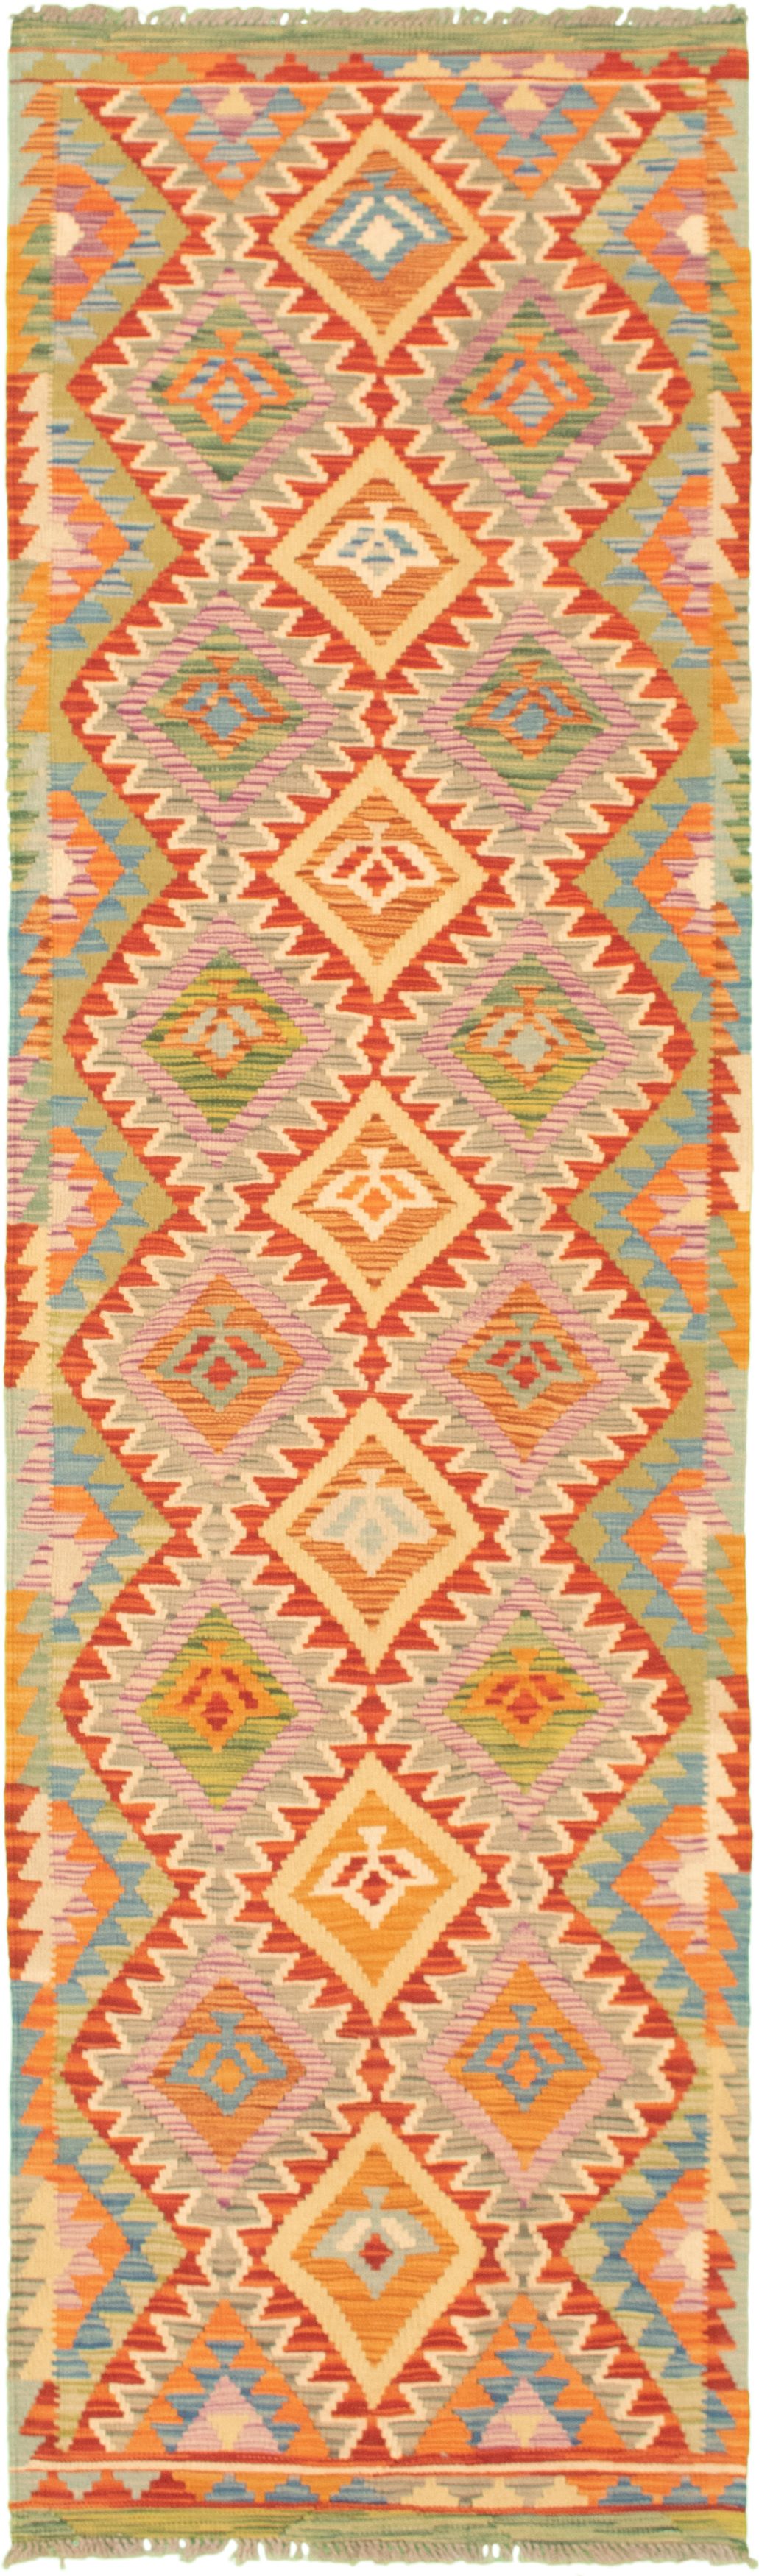 Hand woven Bold and Colorful  Dark Copper Wool Kilim 2'7" x 9'9" Size: 2'7" x 9'9"  